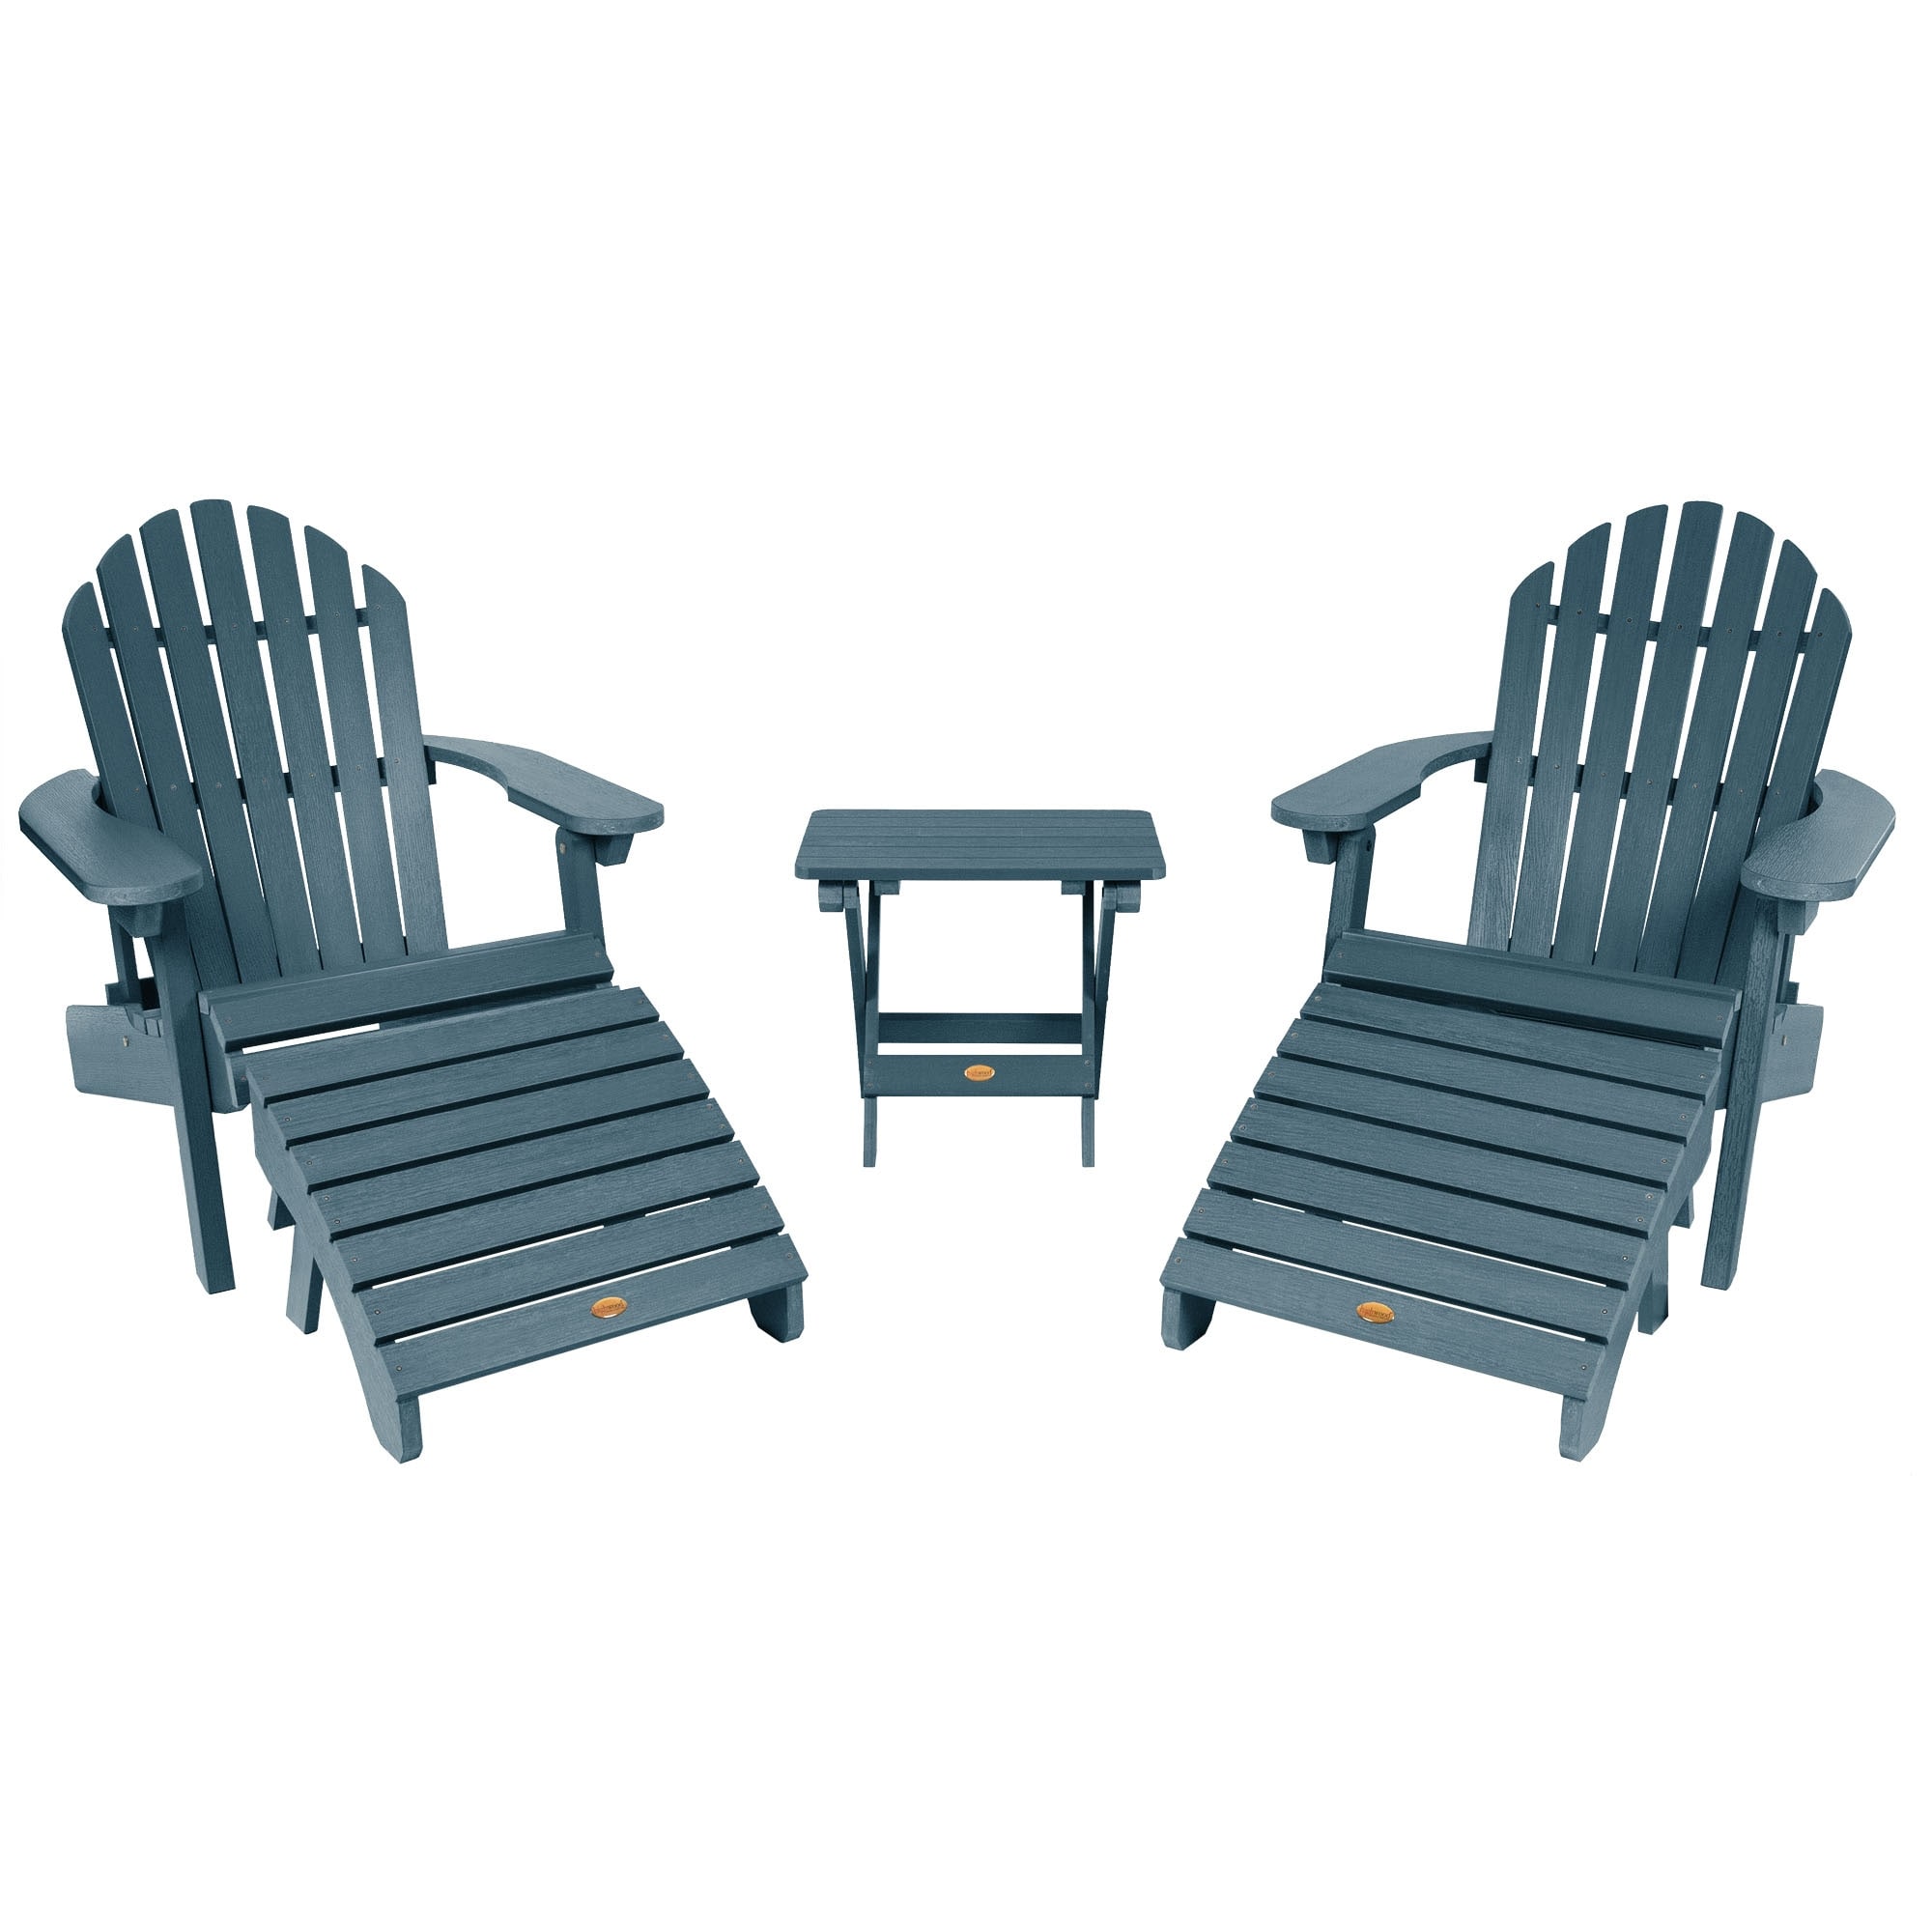 2 Reclining Adirondack Chairs With Matching Ottomans And Folding Side Table